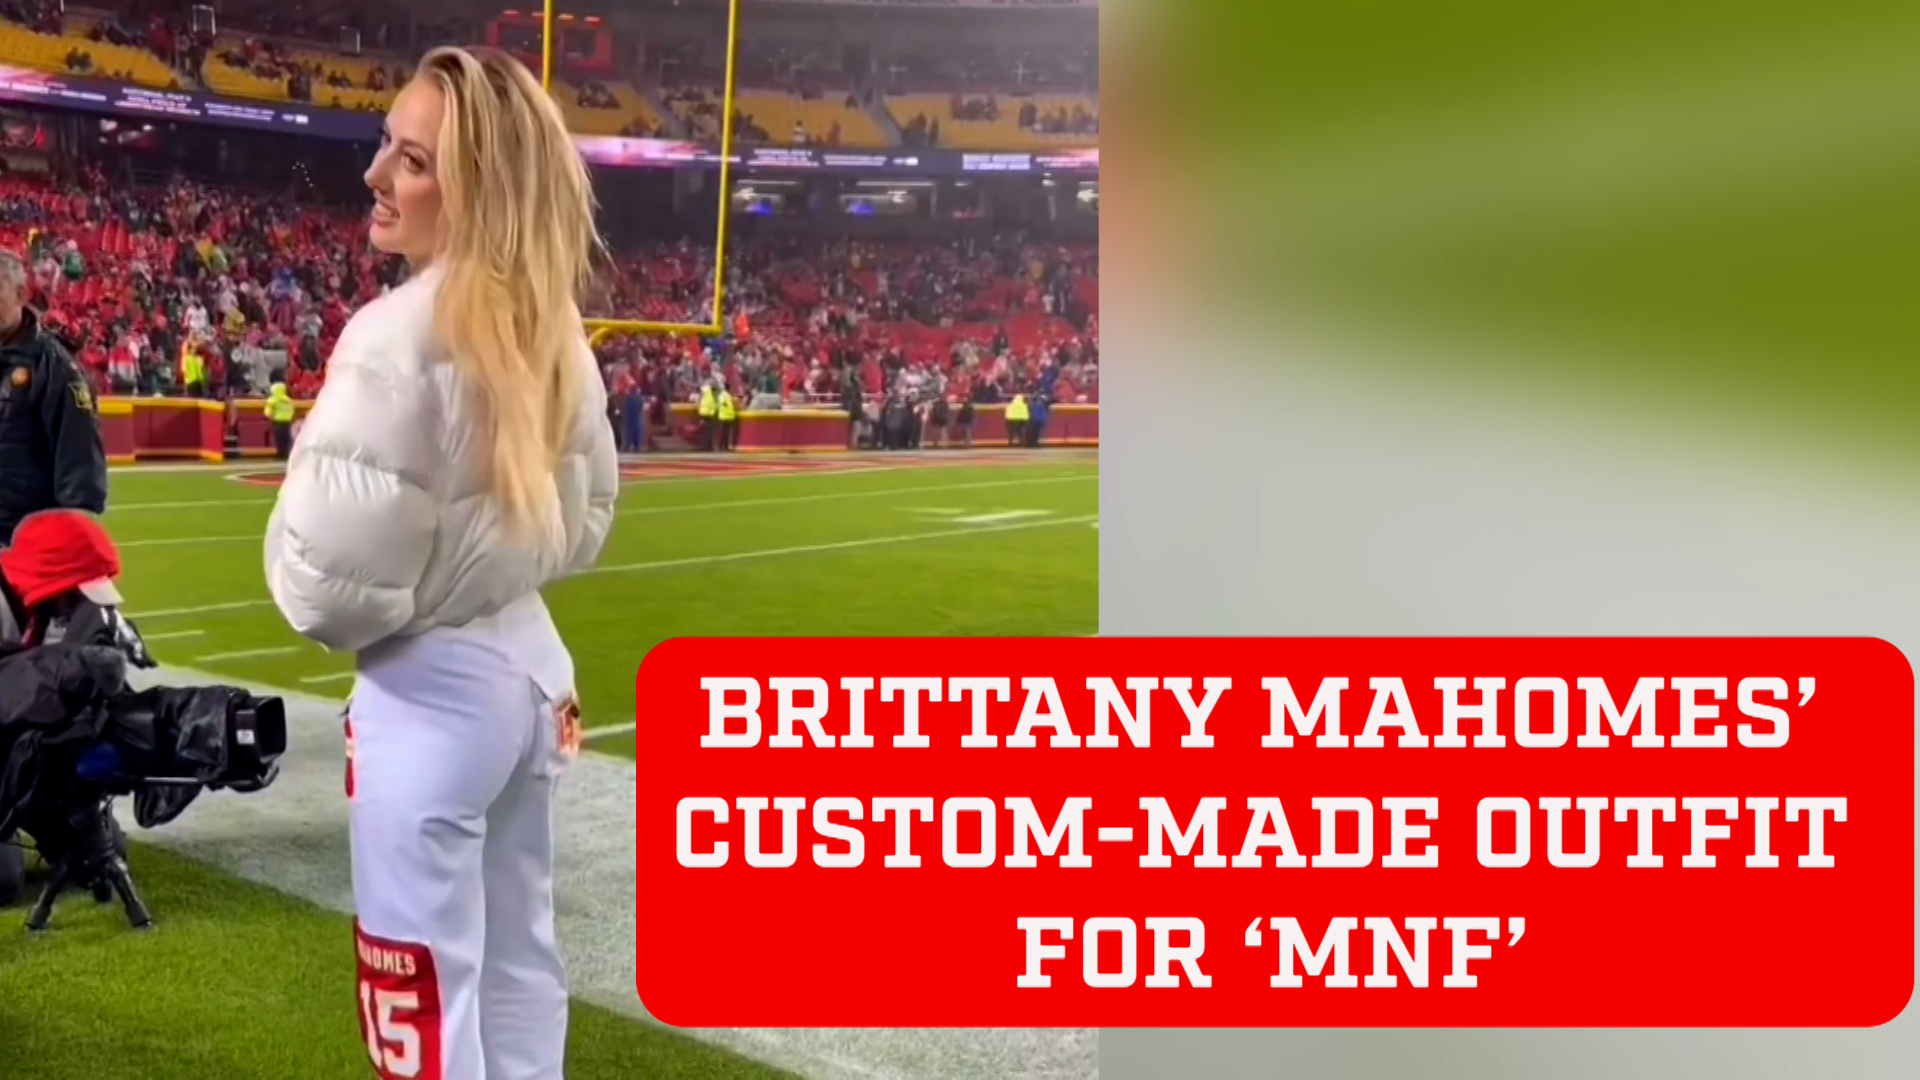 Brittany Mahomes' awesome tailor-made outfit for the Chiefs 'Monday Night Football' game